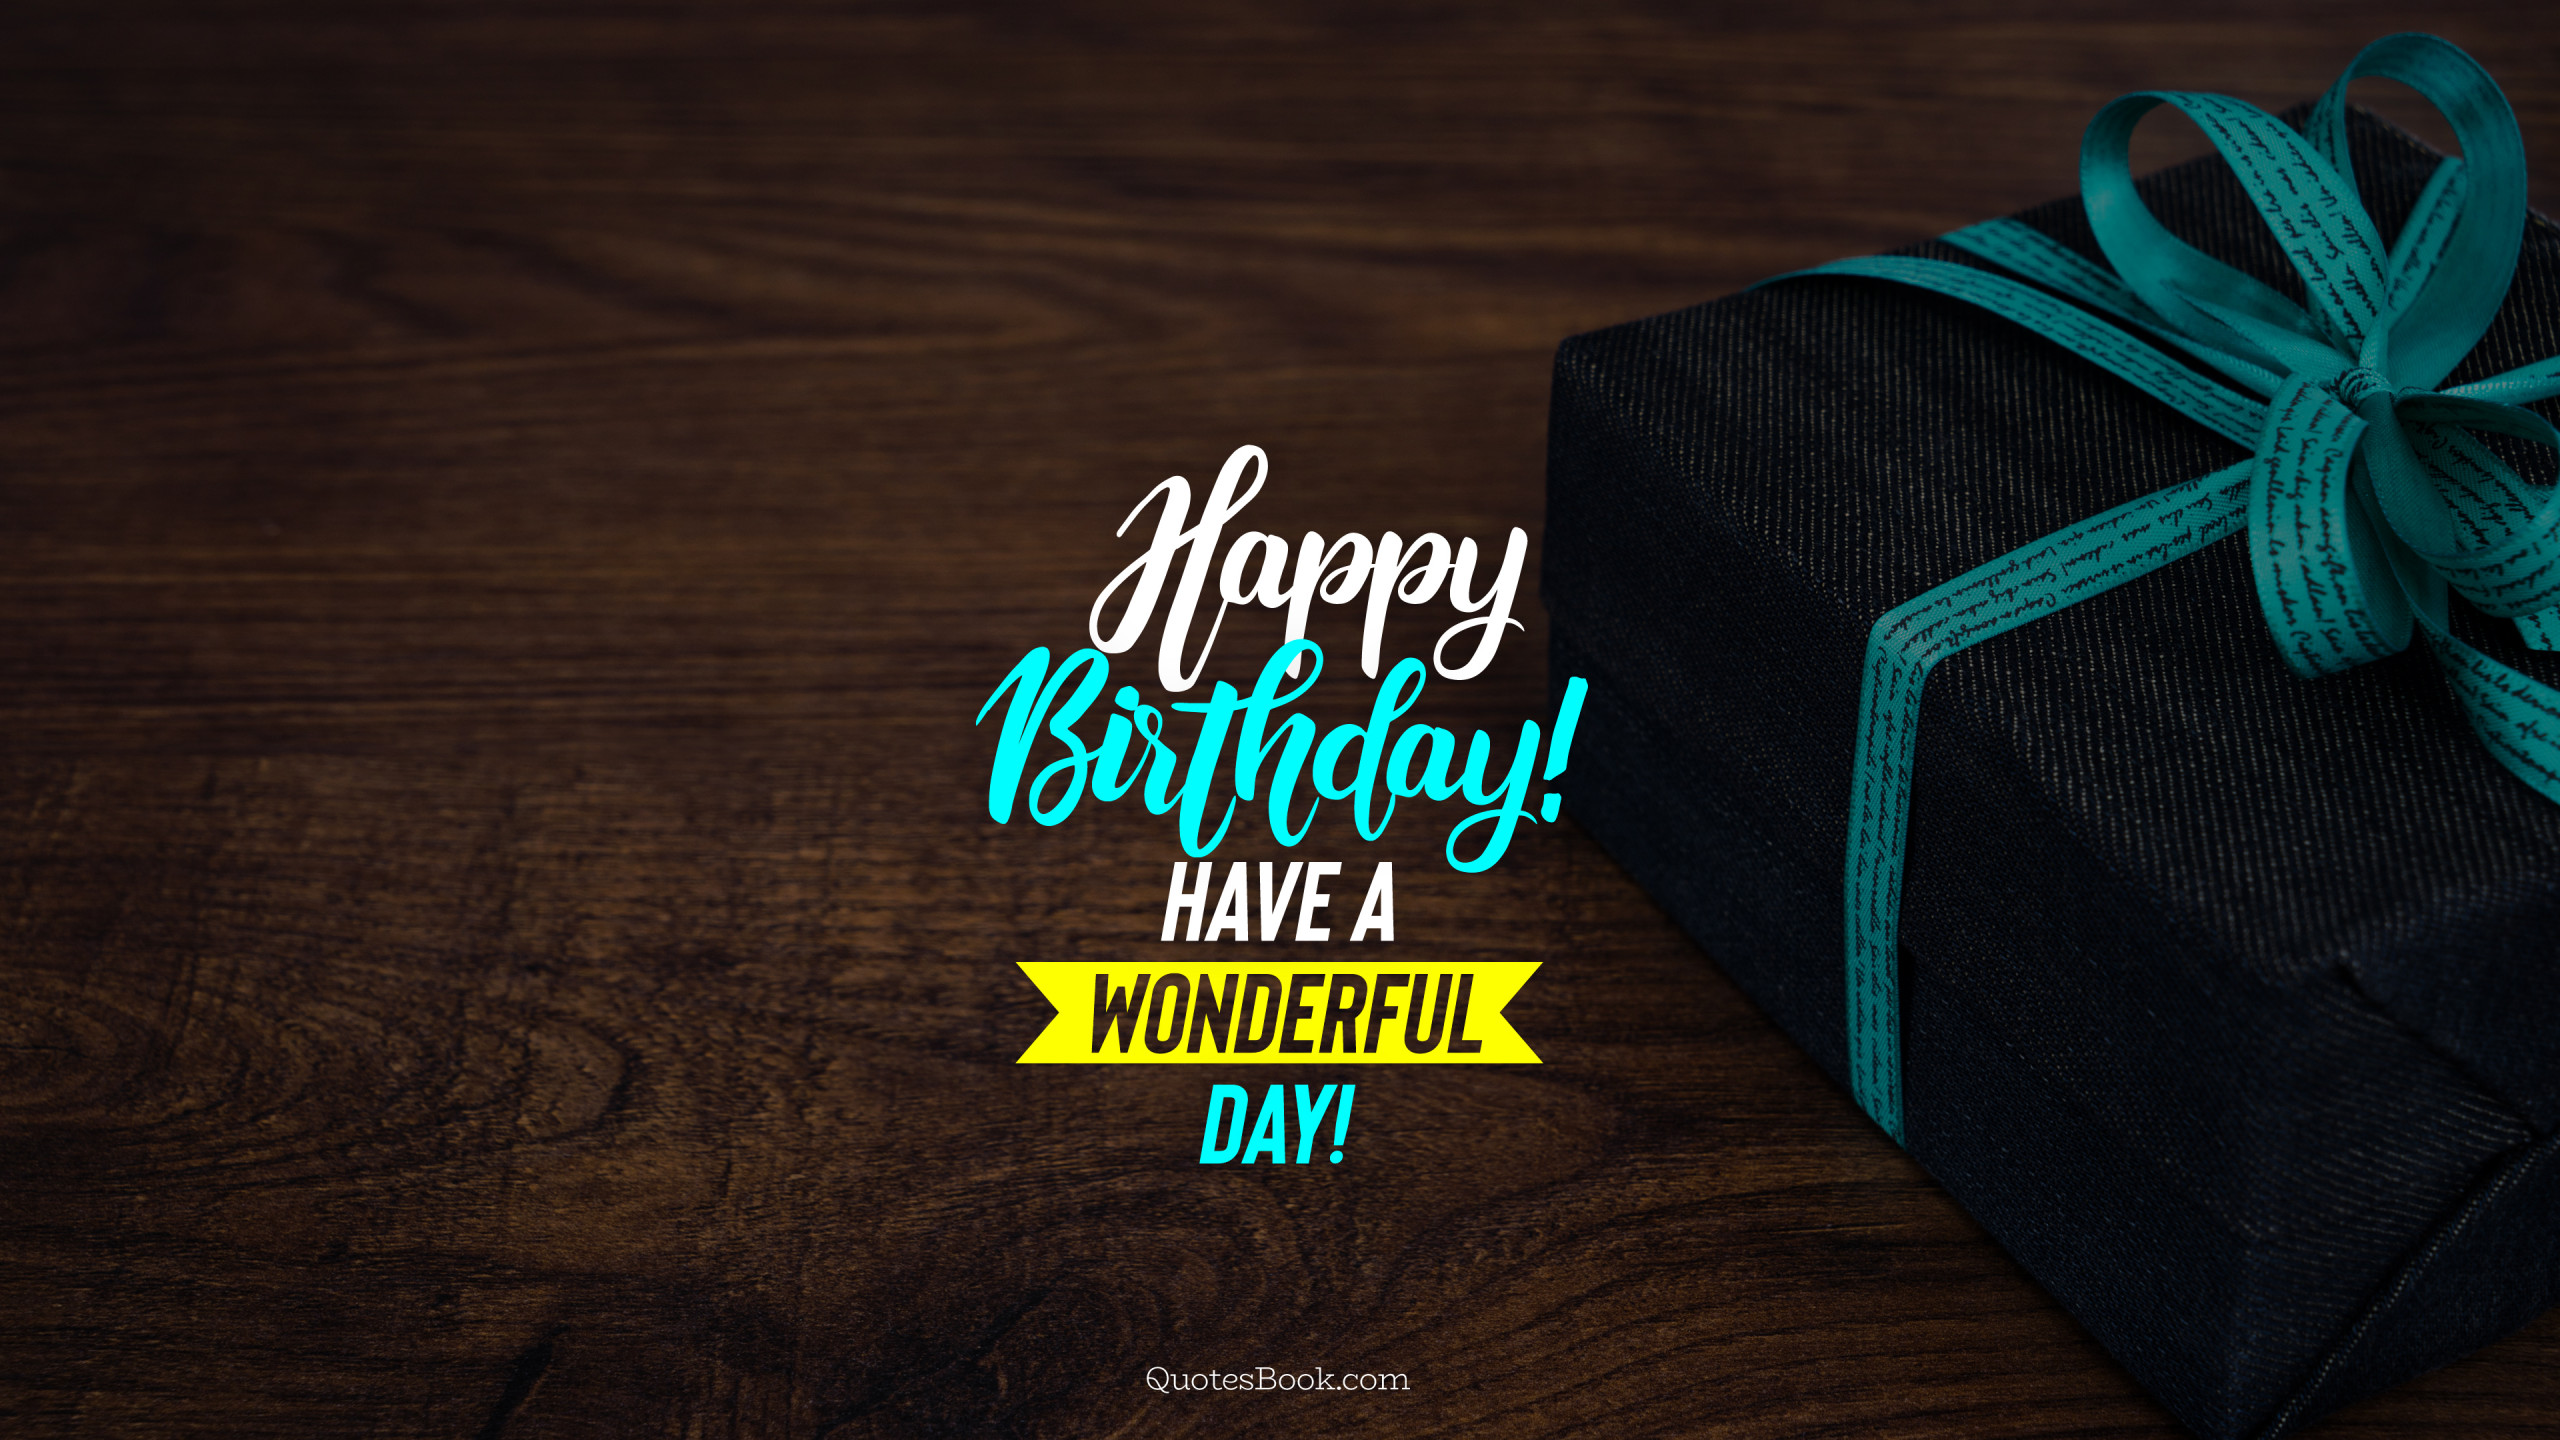 Happy Birthday! Have a wonderful day! - QuotesBook